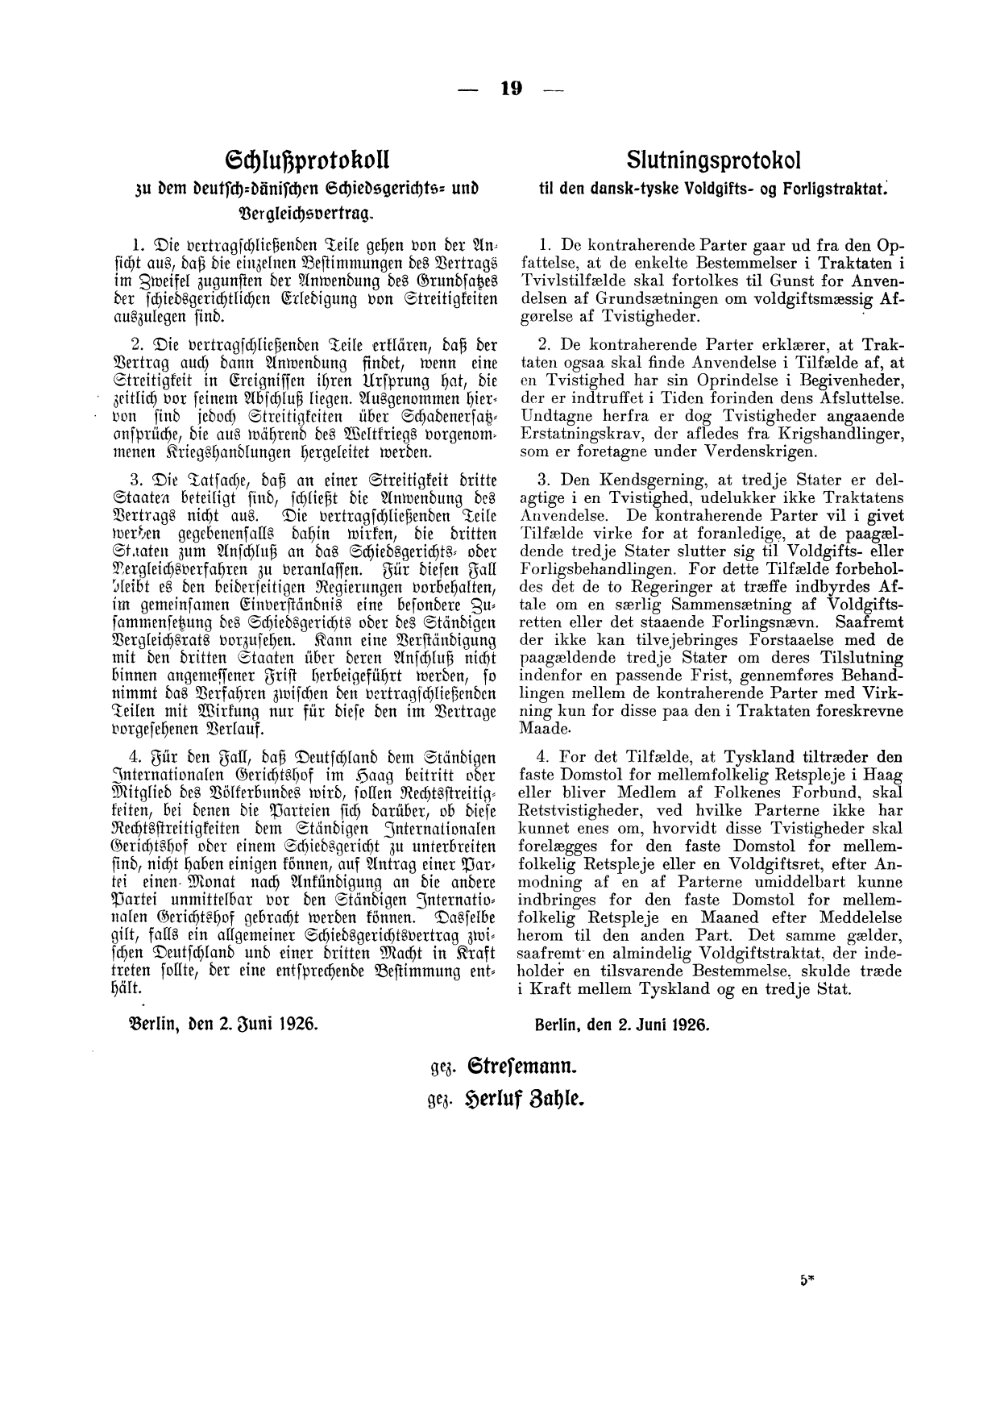 Scan of page 19